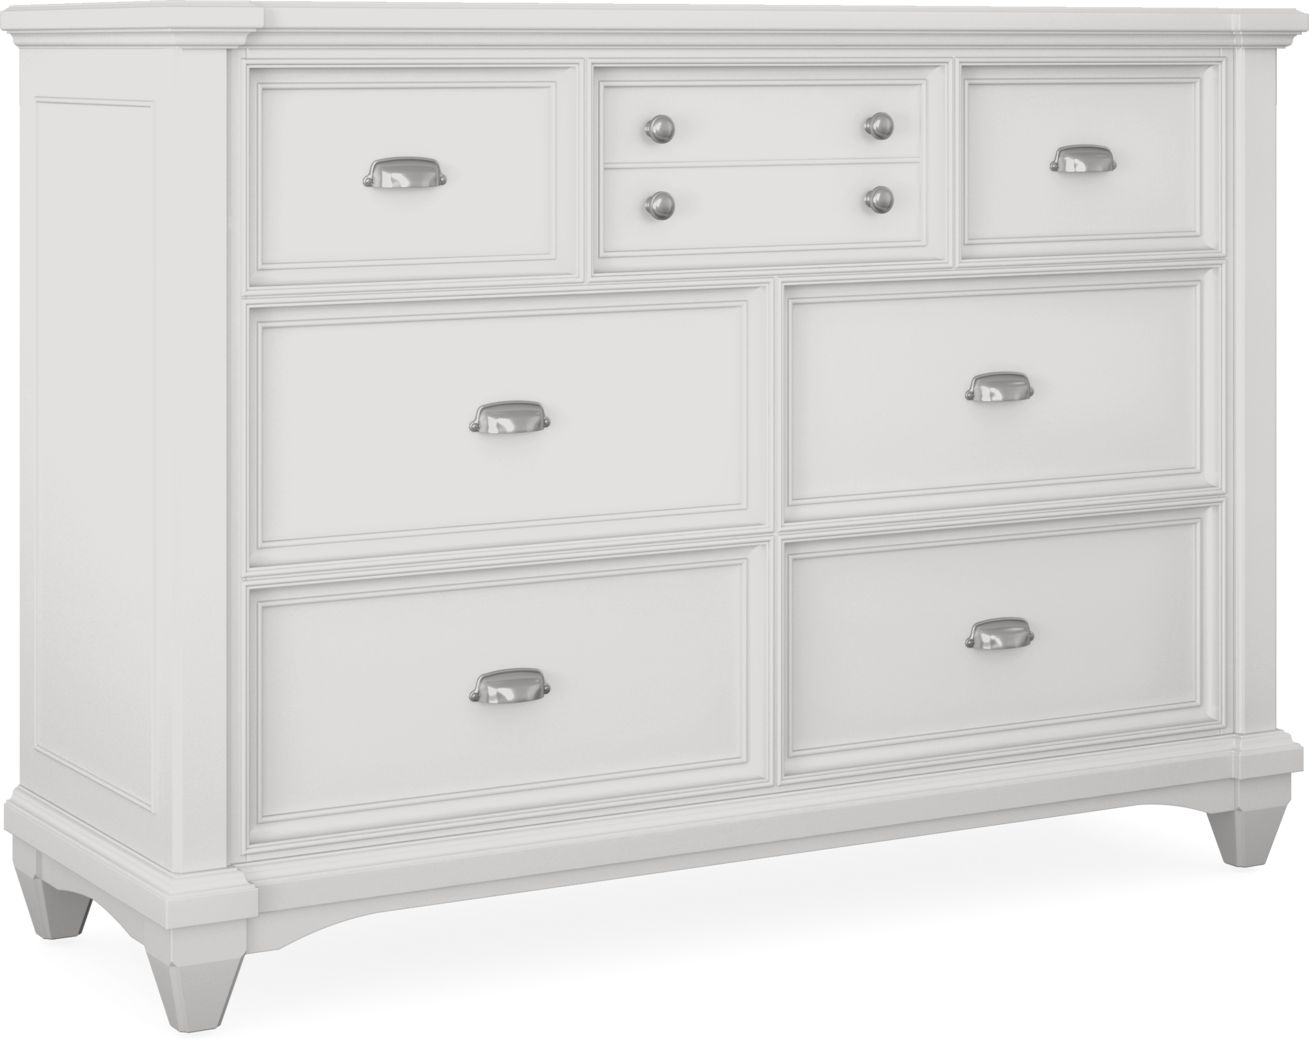 White Double Bedroom Dressers, Bailey 6 Drawer Double Dresser In White